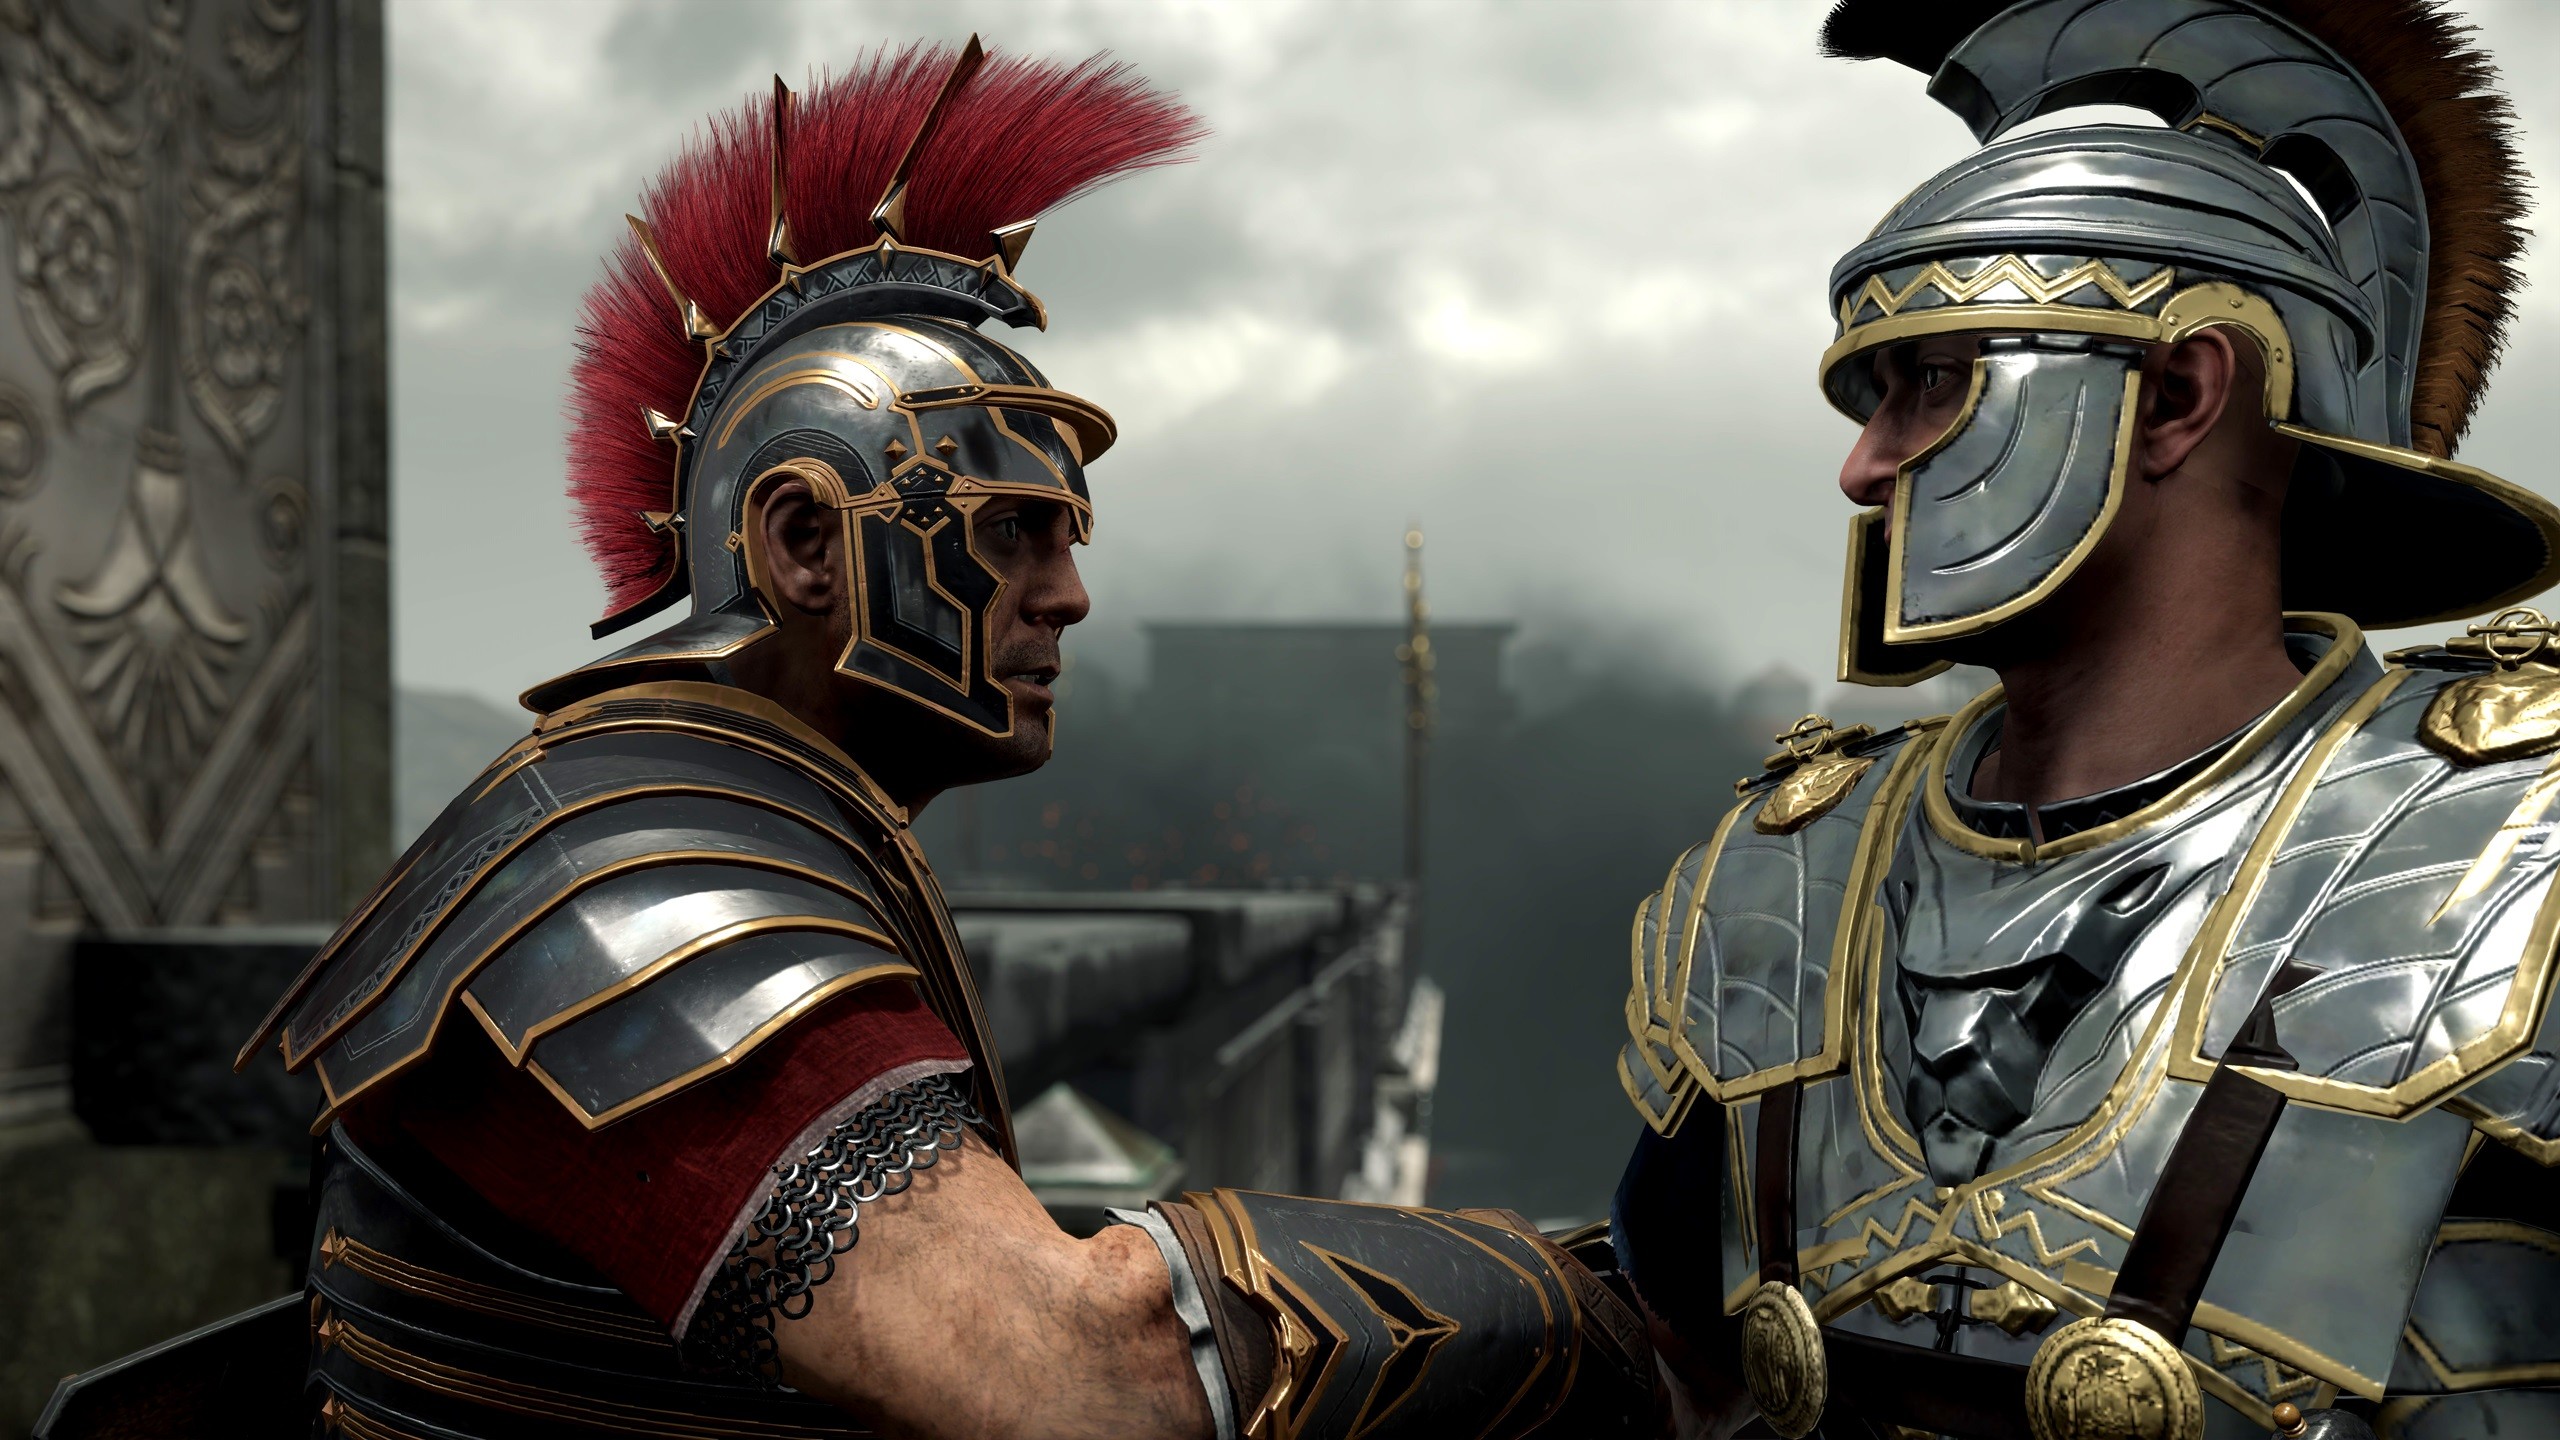 The hero of Ryse Son of Rome, Marius is a young soldier with a strong sense of duty who is completely dedicated to Rome and her ideals